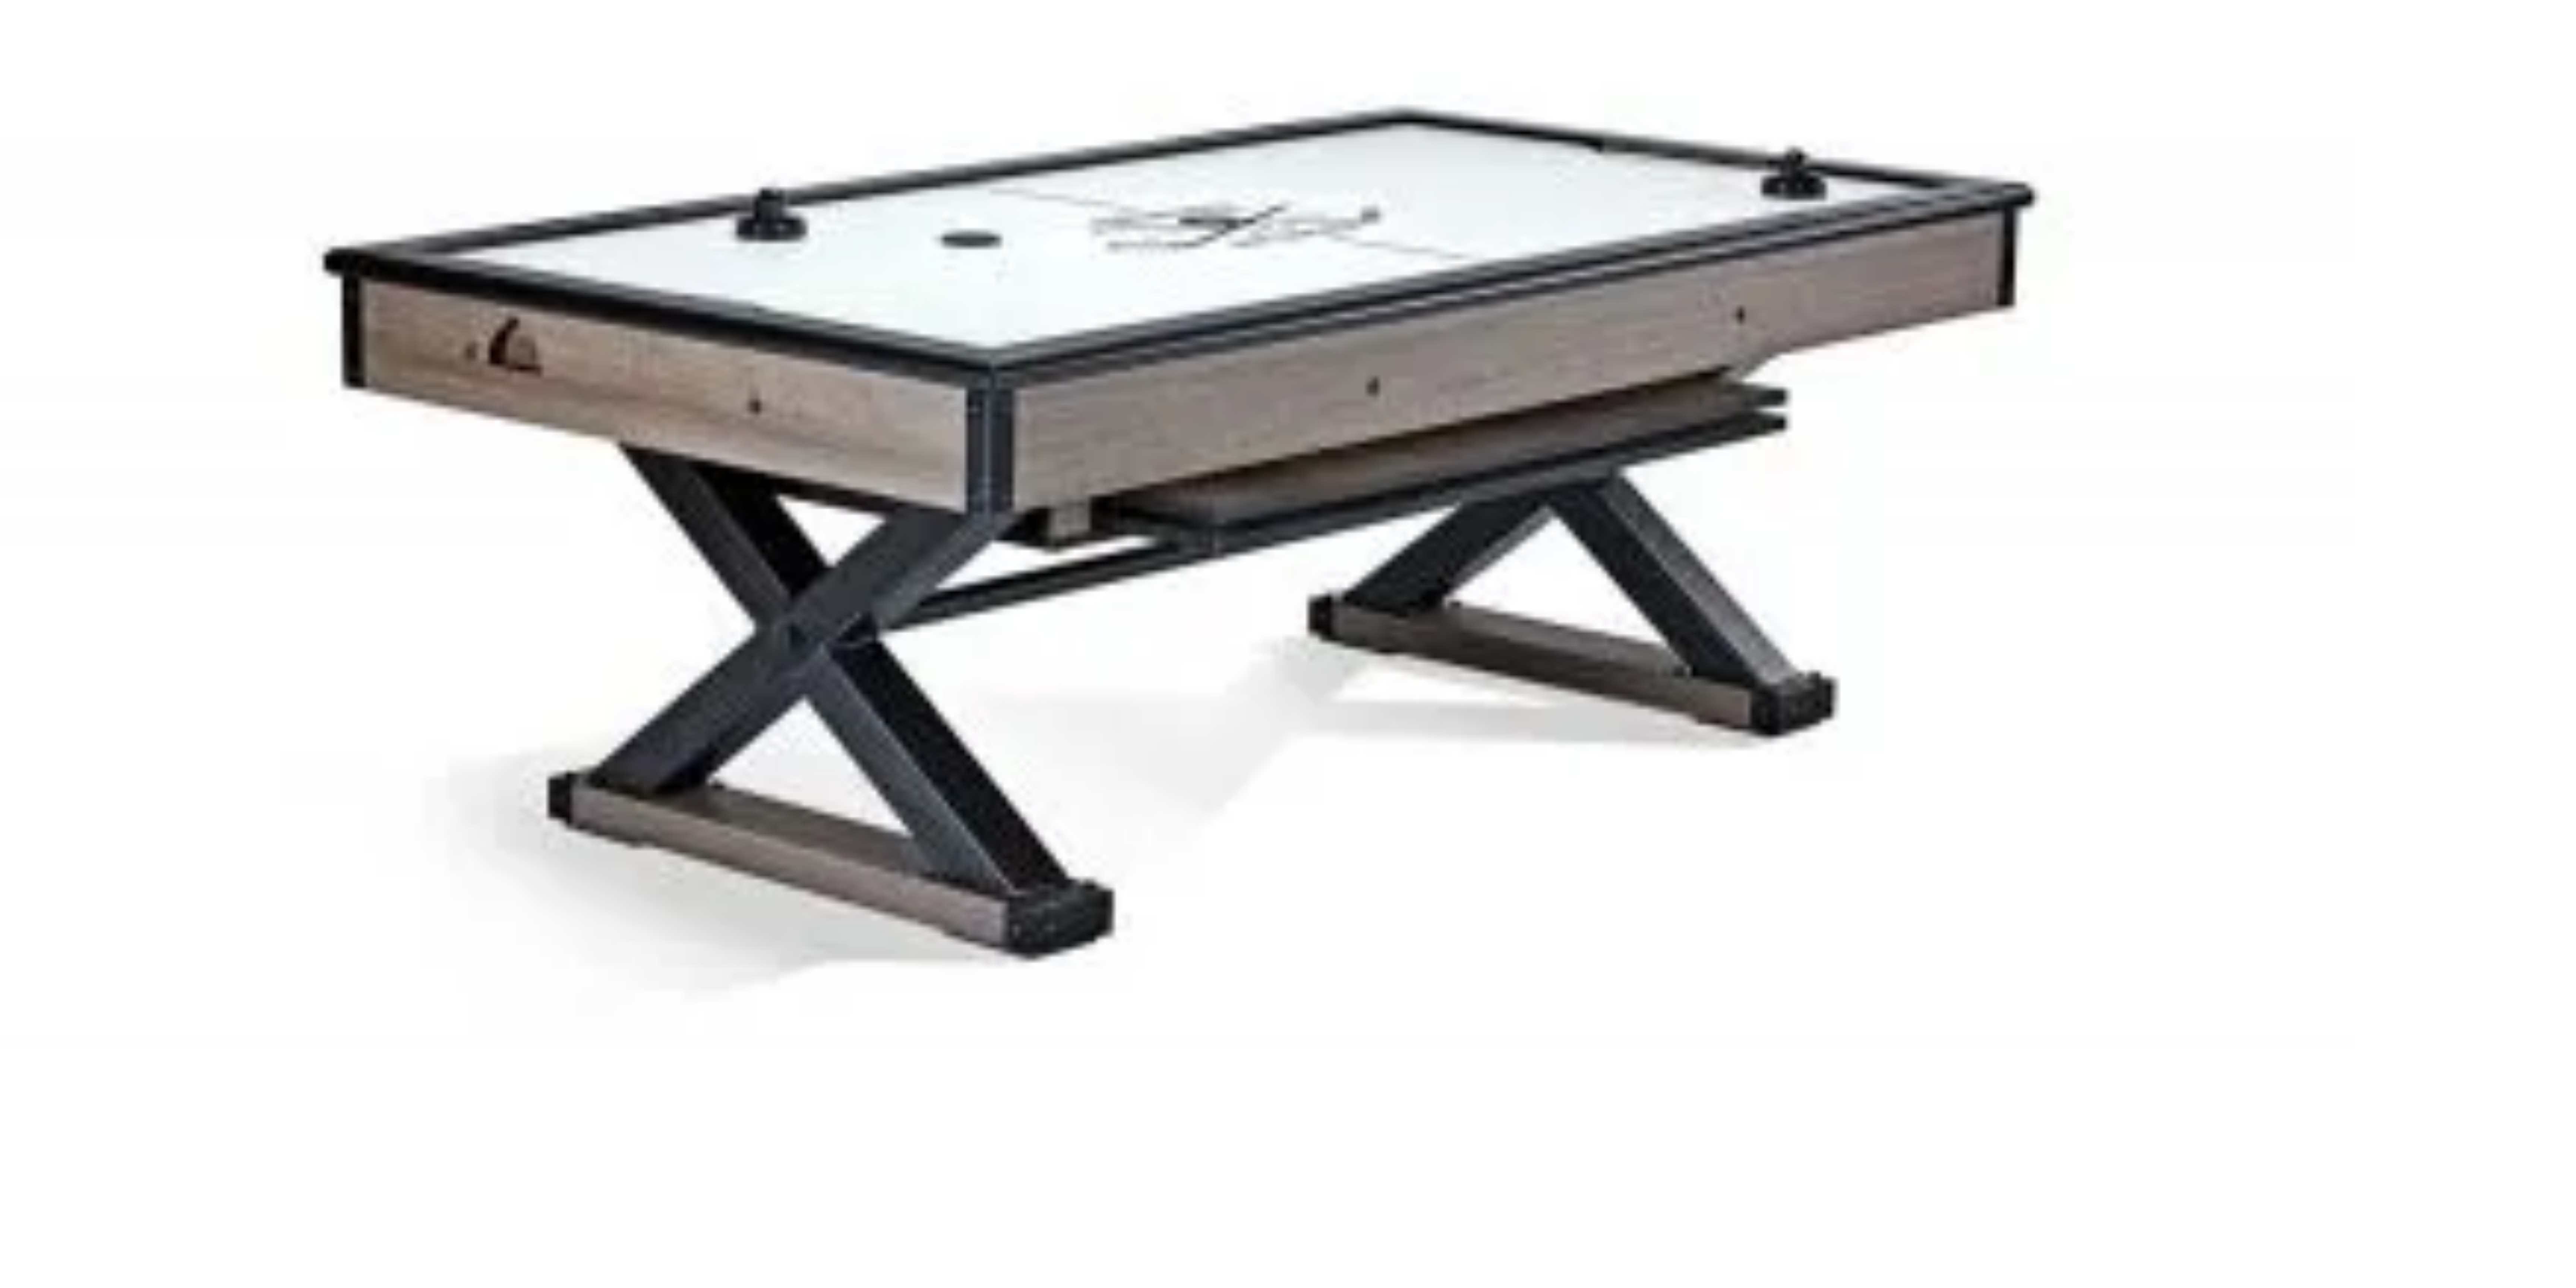 An air hockey table with a steel-framed base that can also be used as a dining table